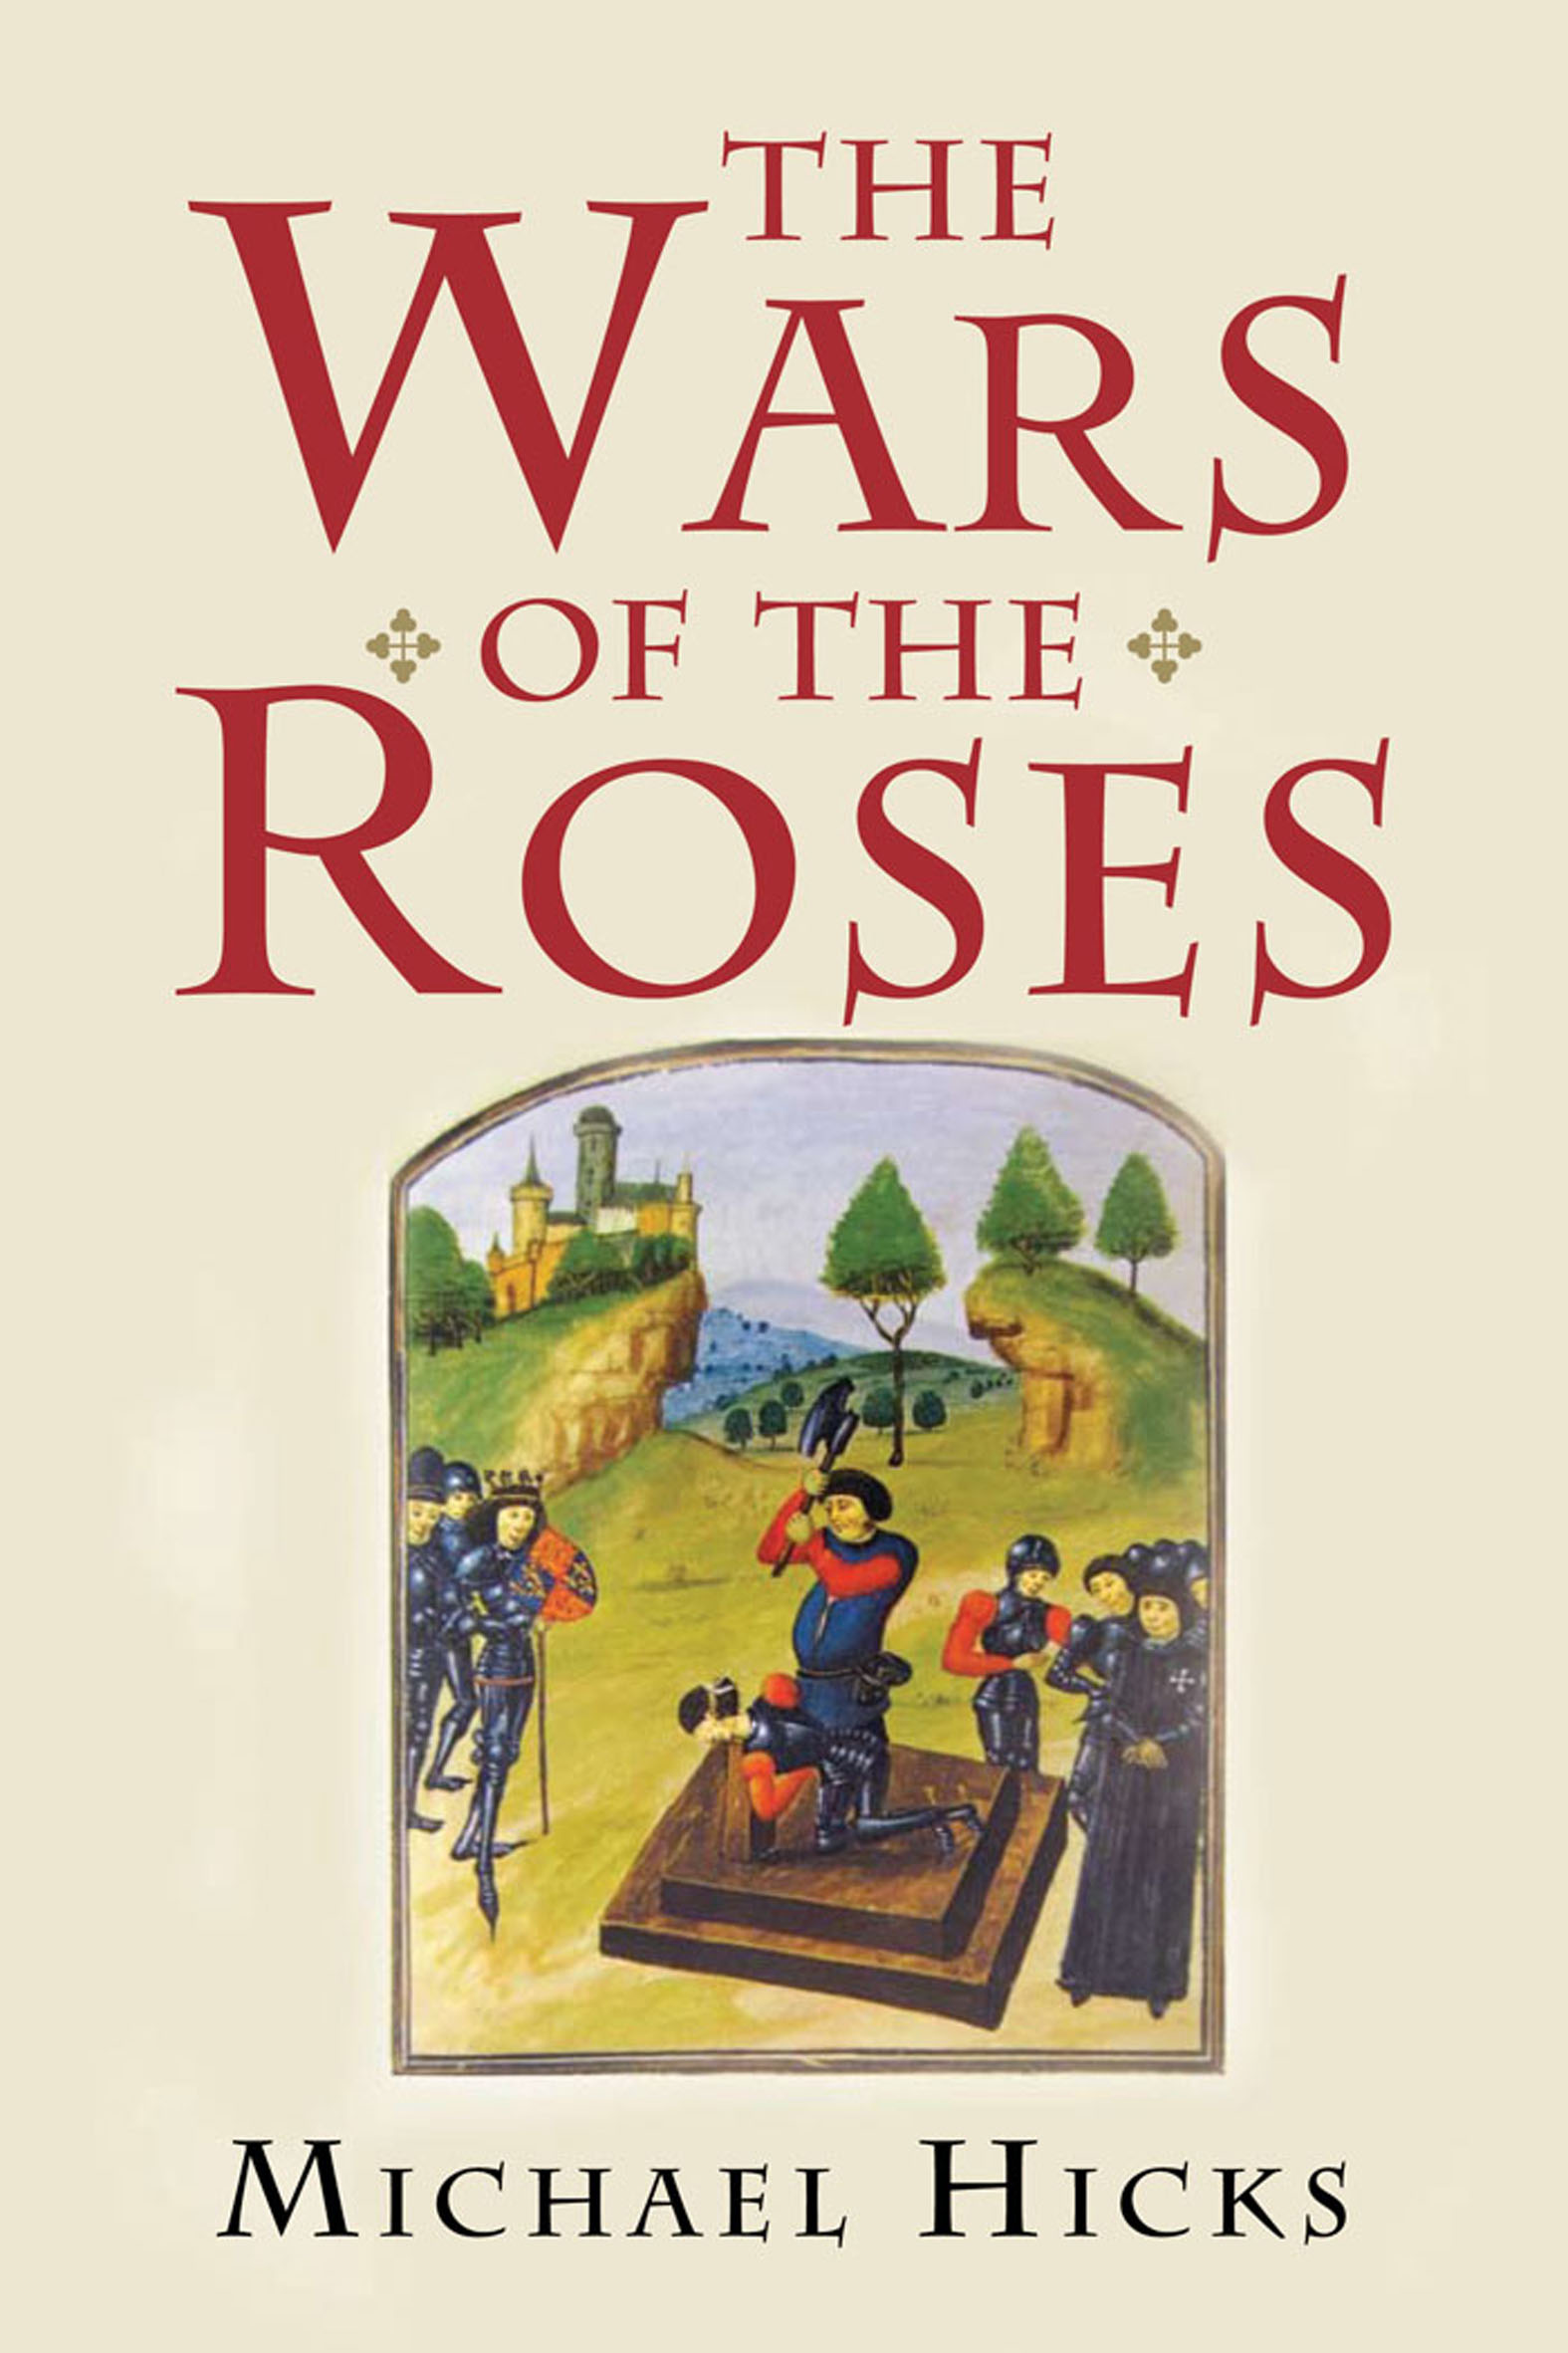 The Wars of the Roses - 15-24.99